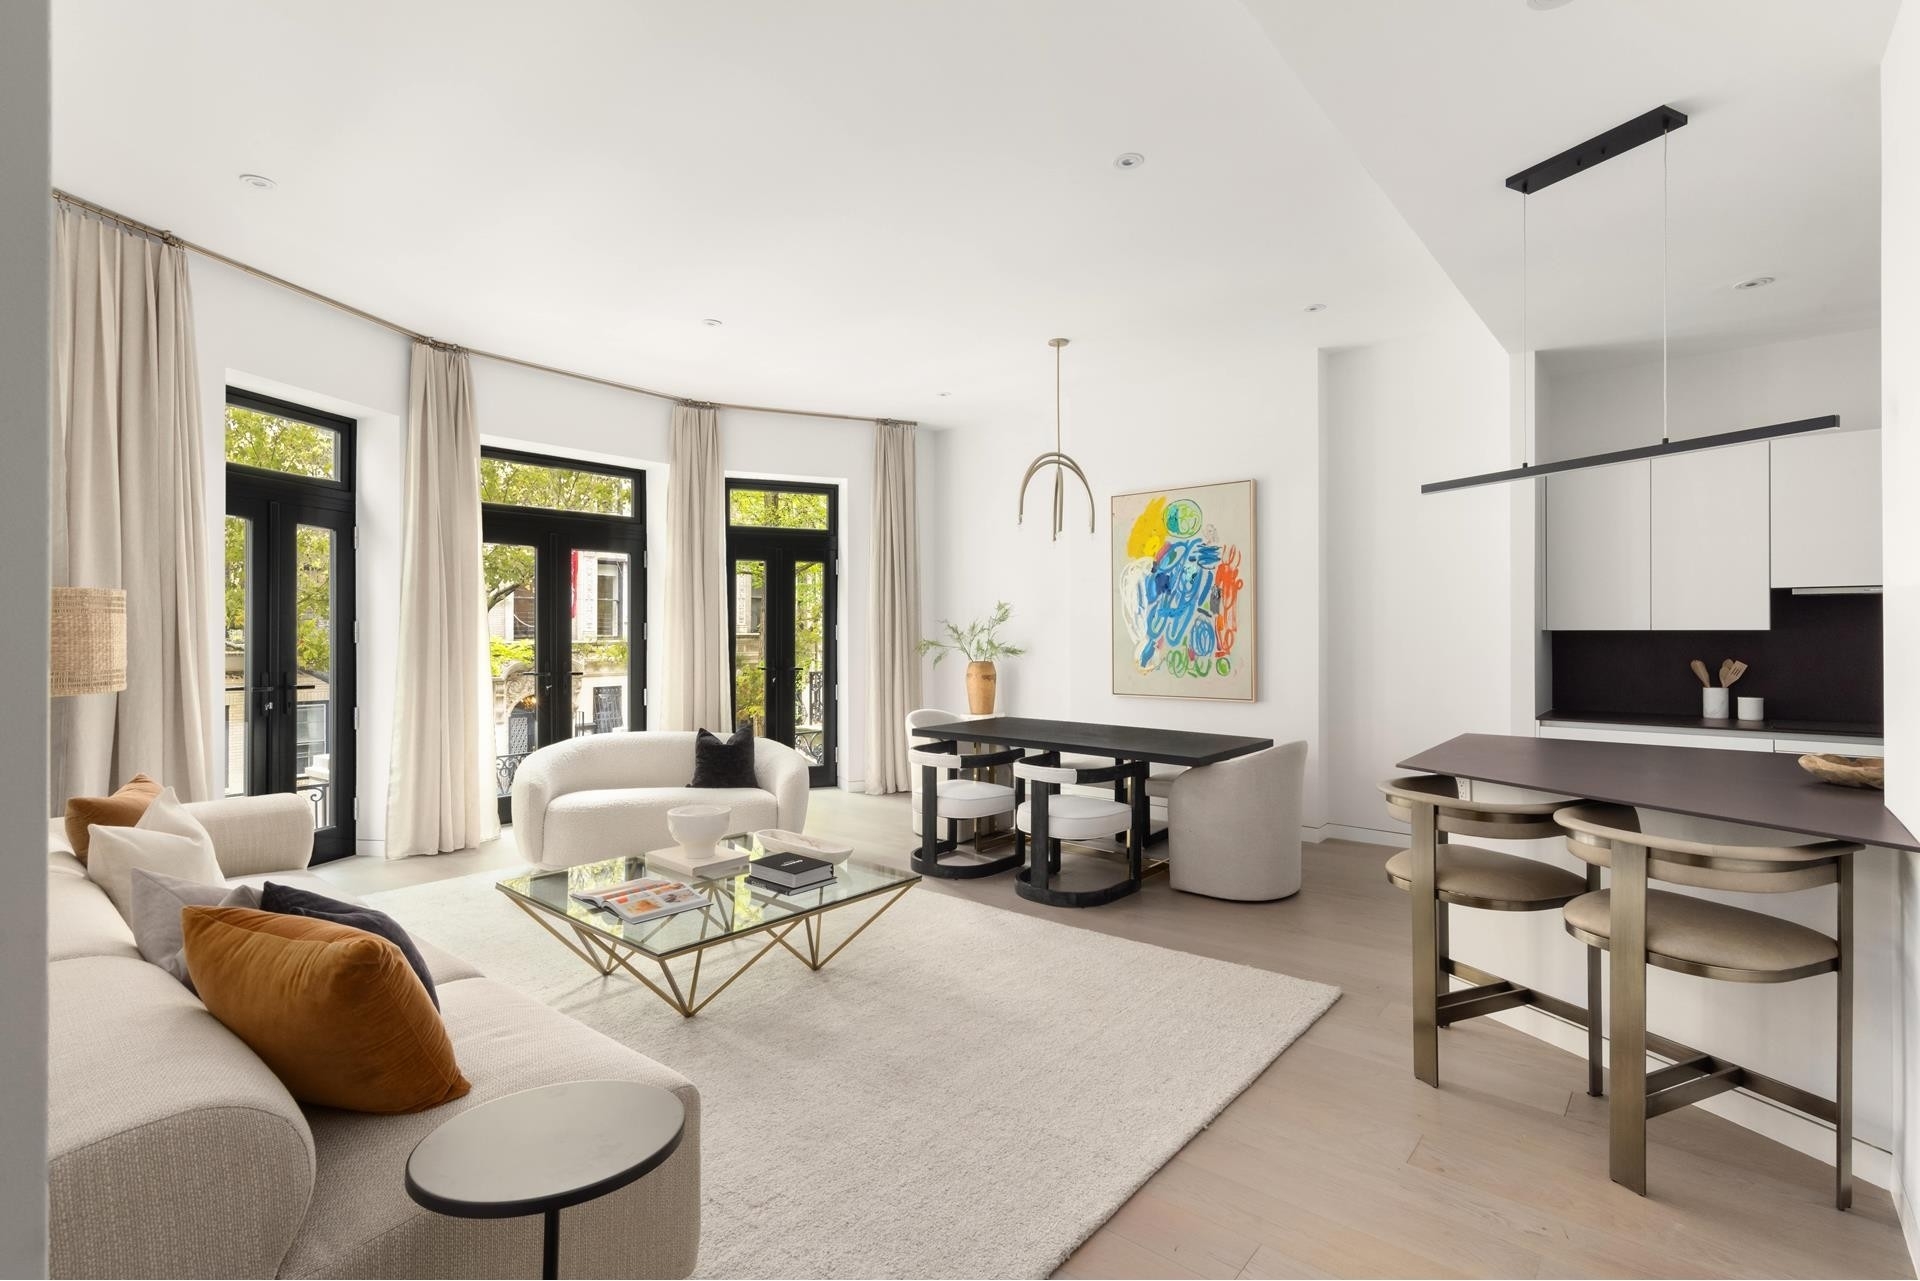 Condominium for Sale at 324 W 108TH ST, 31 Upper West Side, New York, NY 10025